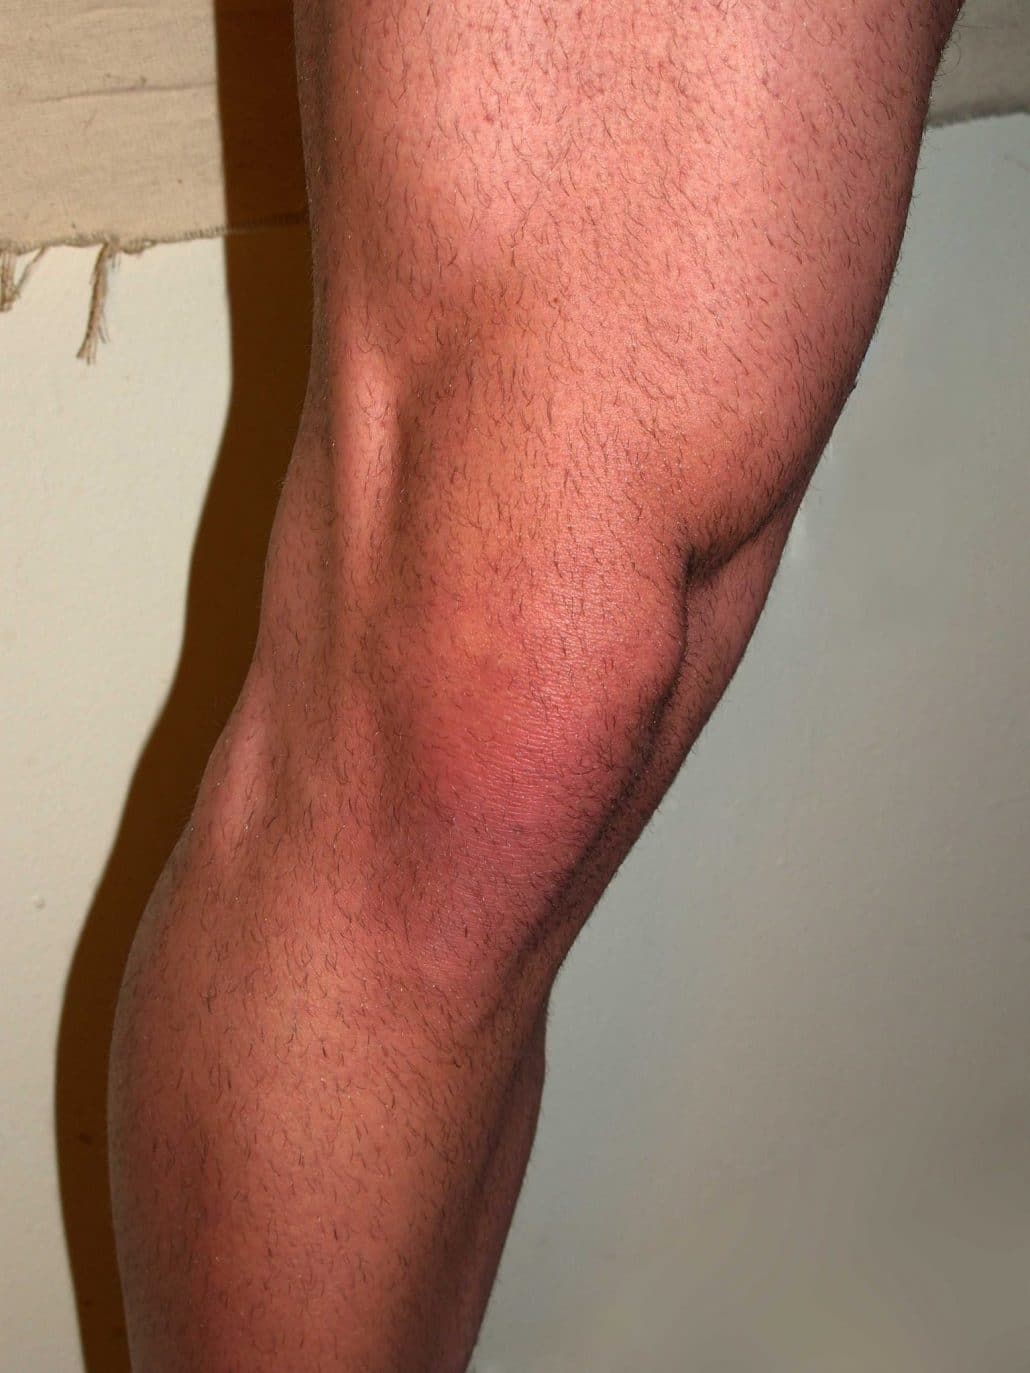 Overview of Knee Pain